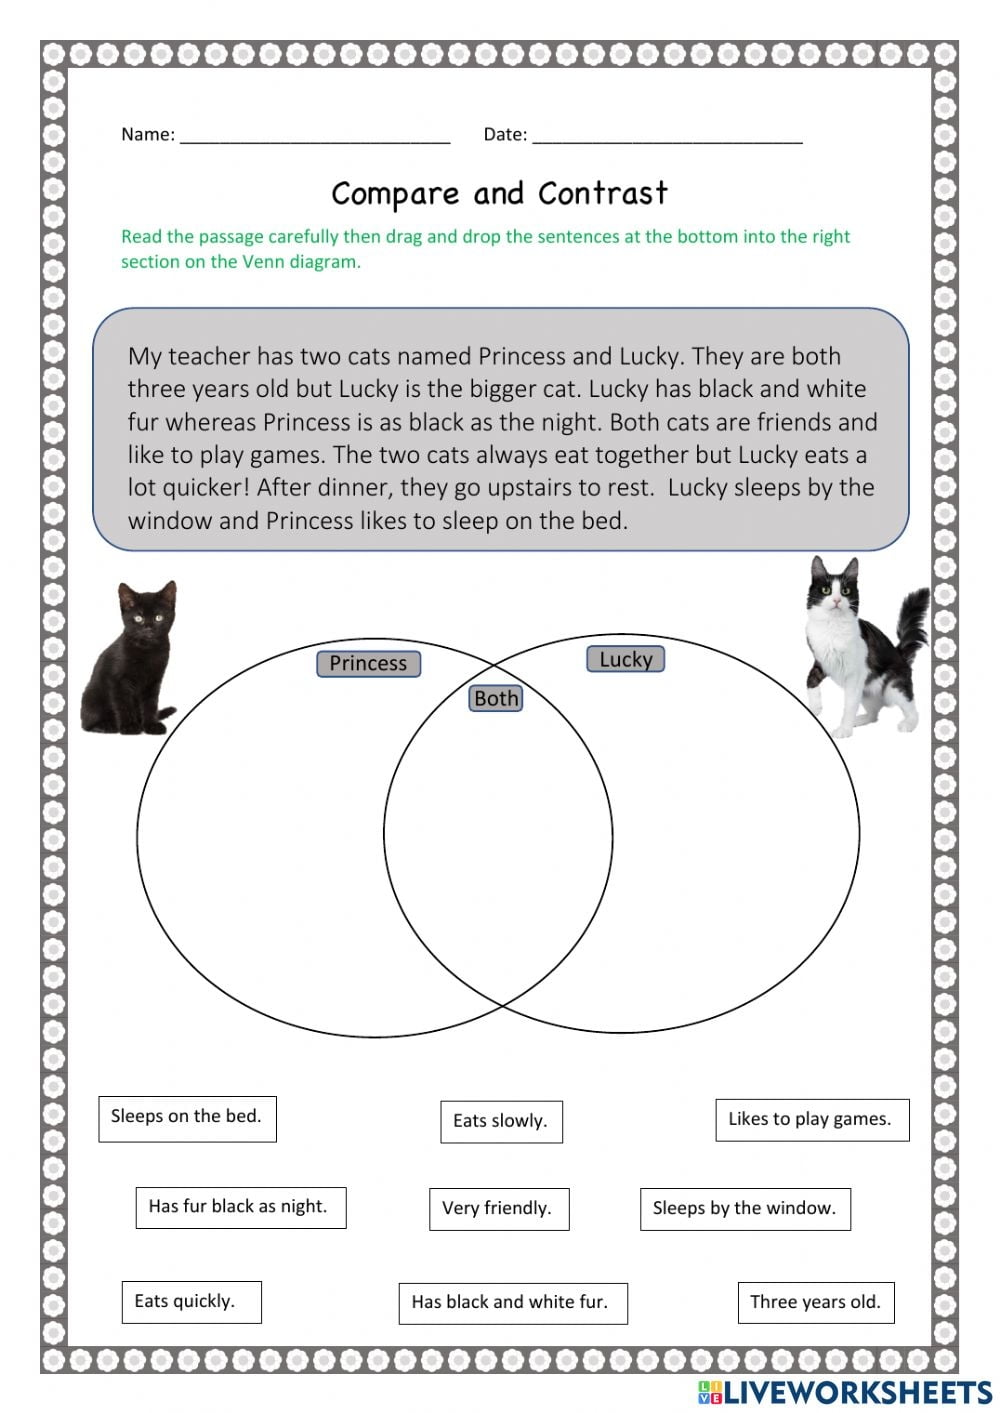 Compare And Contrast Interactive Worksheet For 3